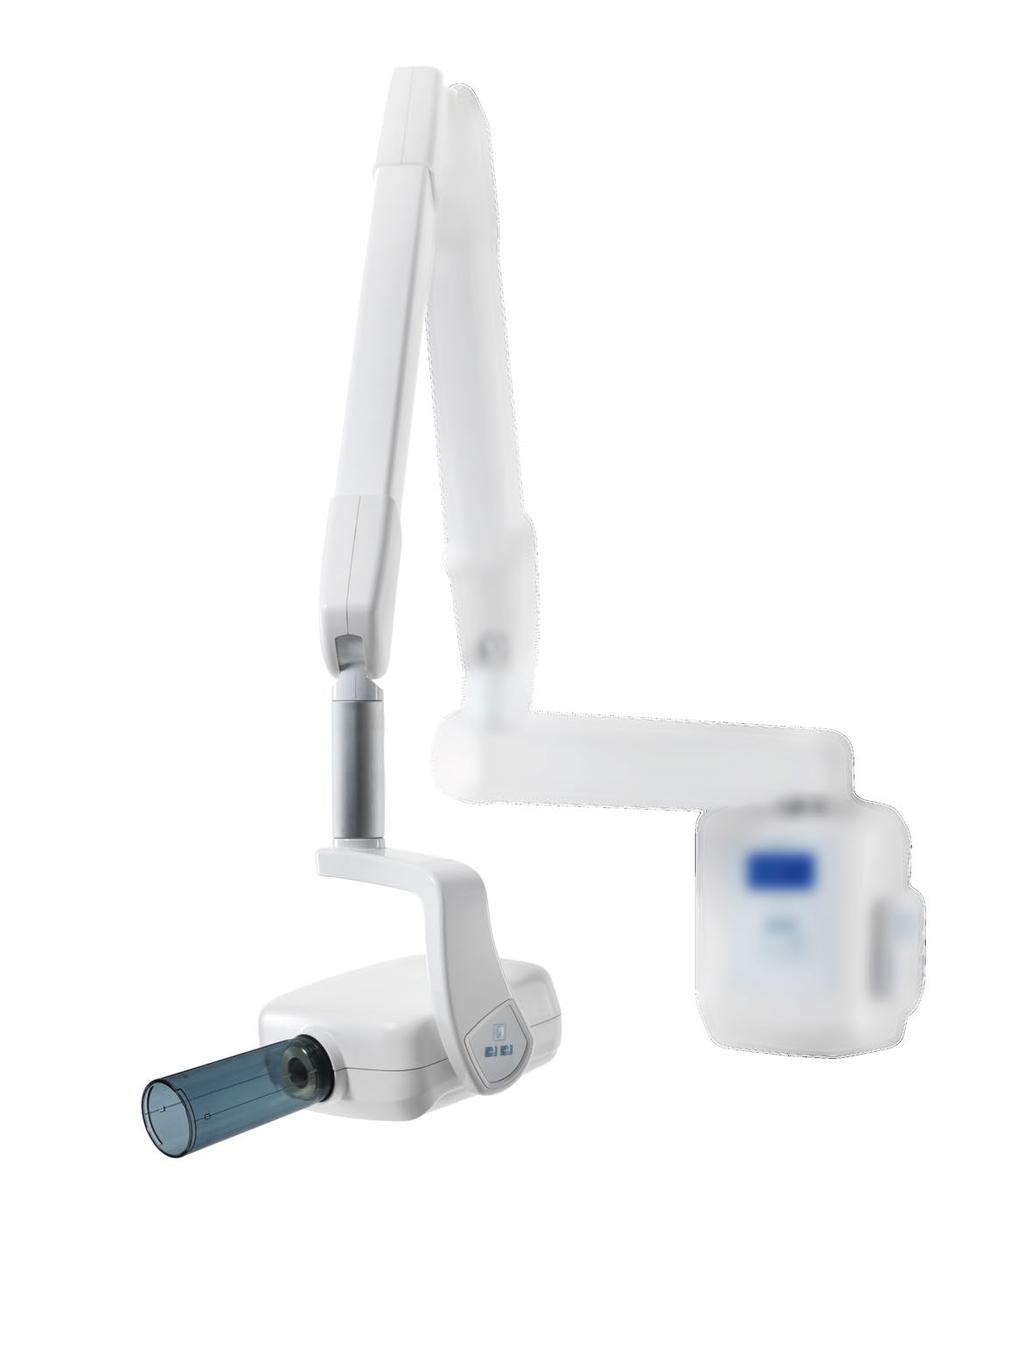 RiX 70 DC Intraoral X-Ray Unit RiX-70 DC, the most advanced high frequency dental X-Ray unit for perfect images.